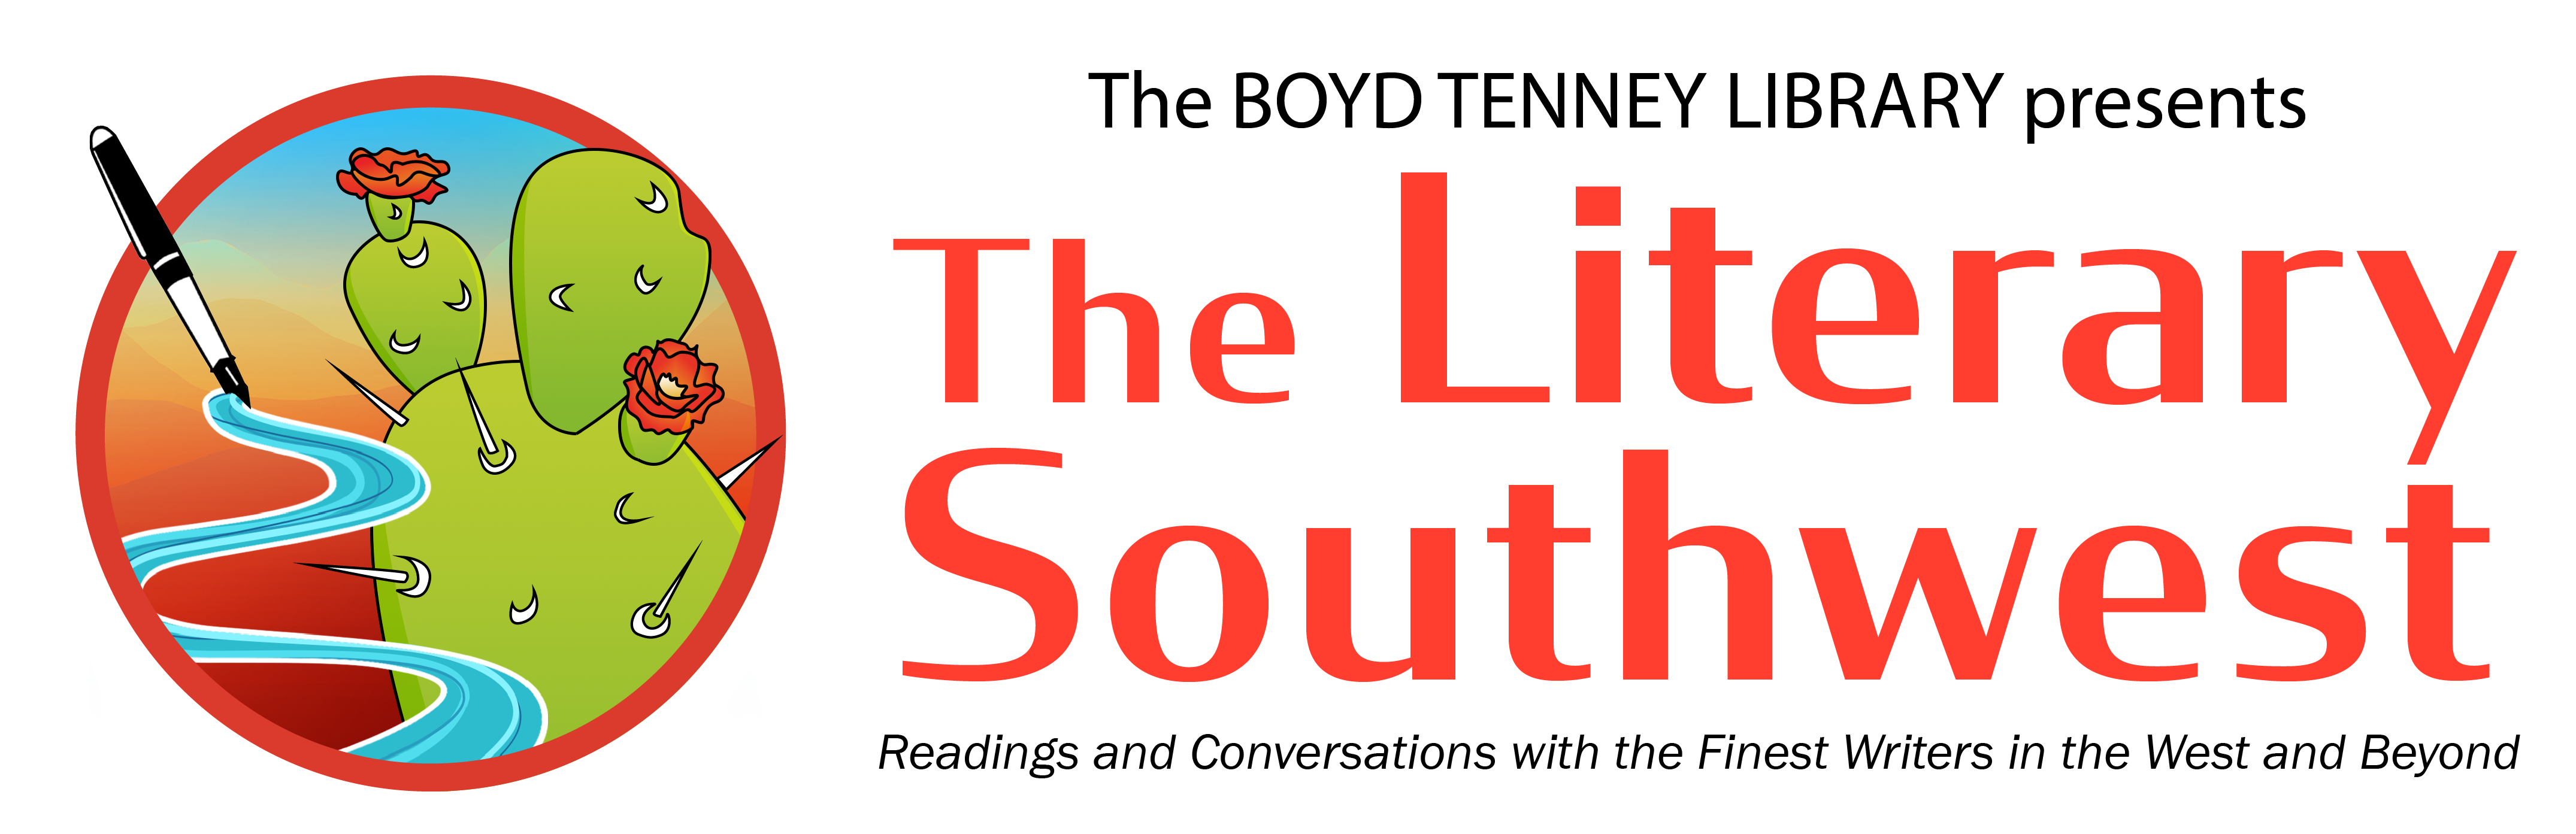 The Boyd Tenney Library presents The Literary Southwest - Readings and conversations with the finest writers in the west and beyond.